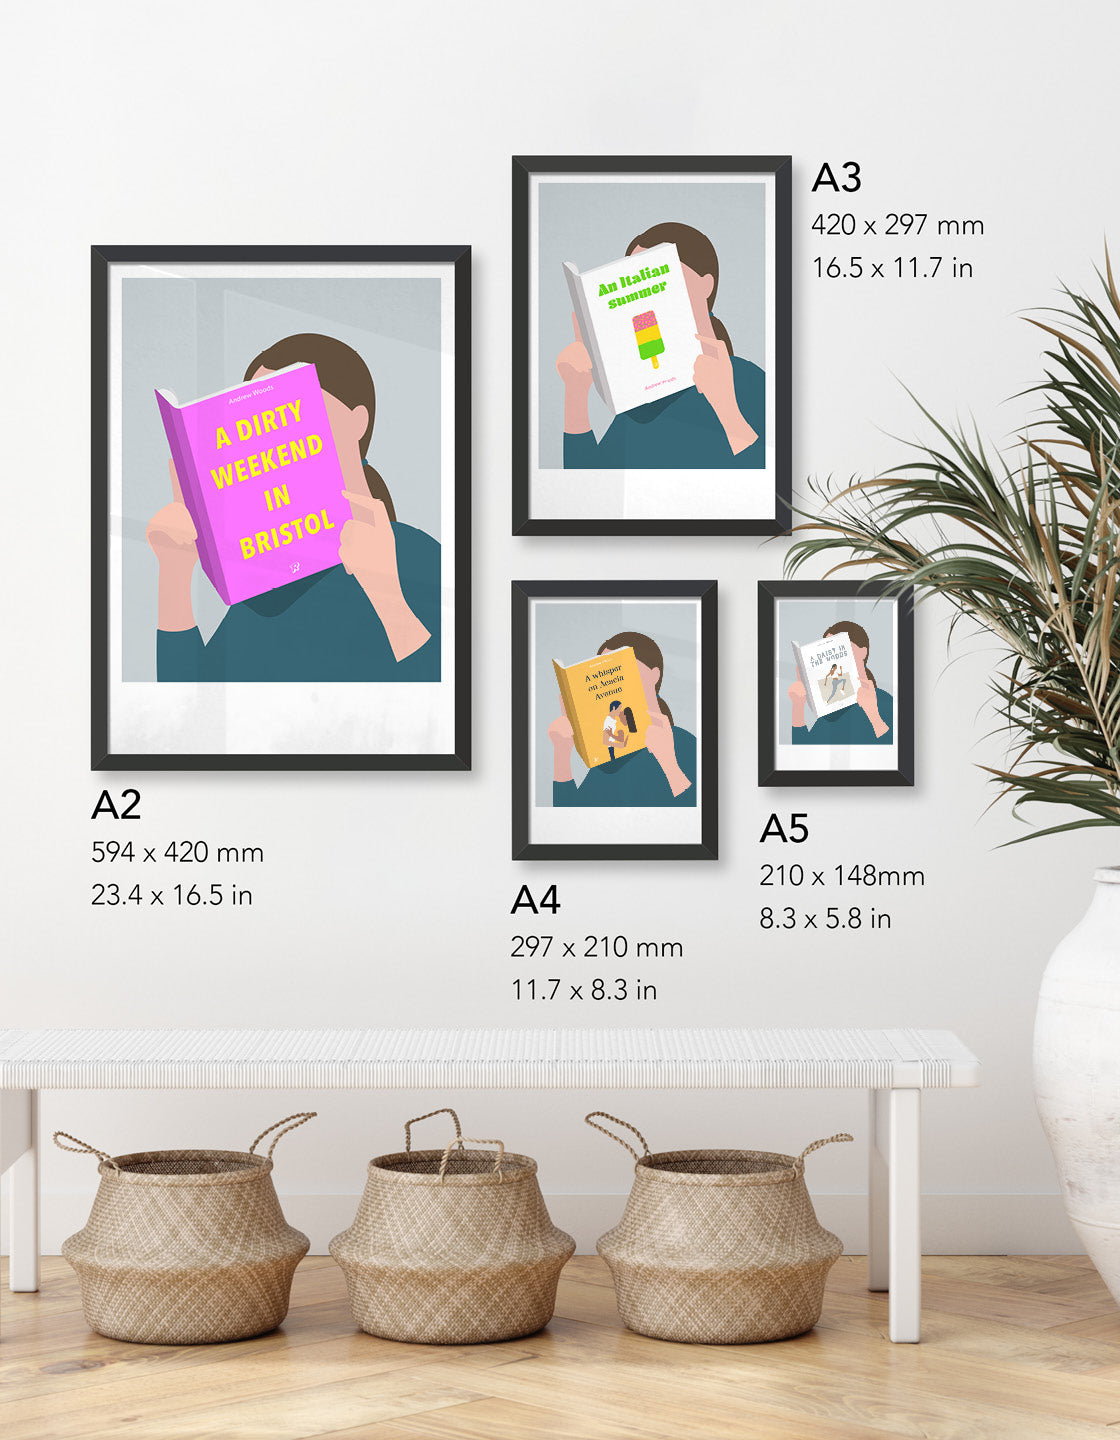 Picture depicts the size options available for this wall art, including A5, A4, A3 and A2